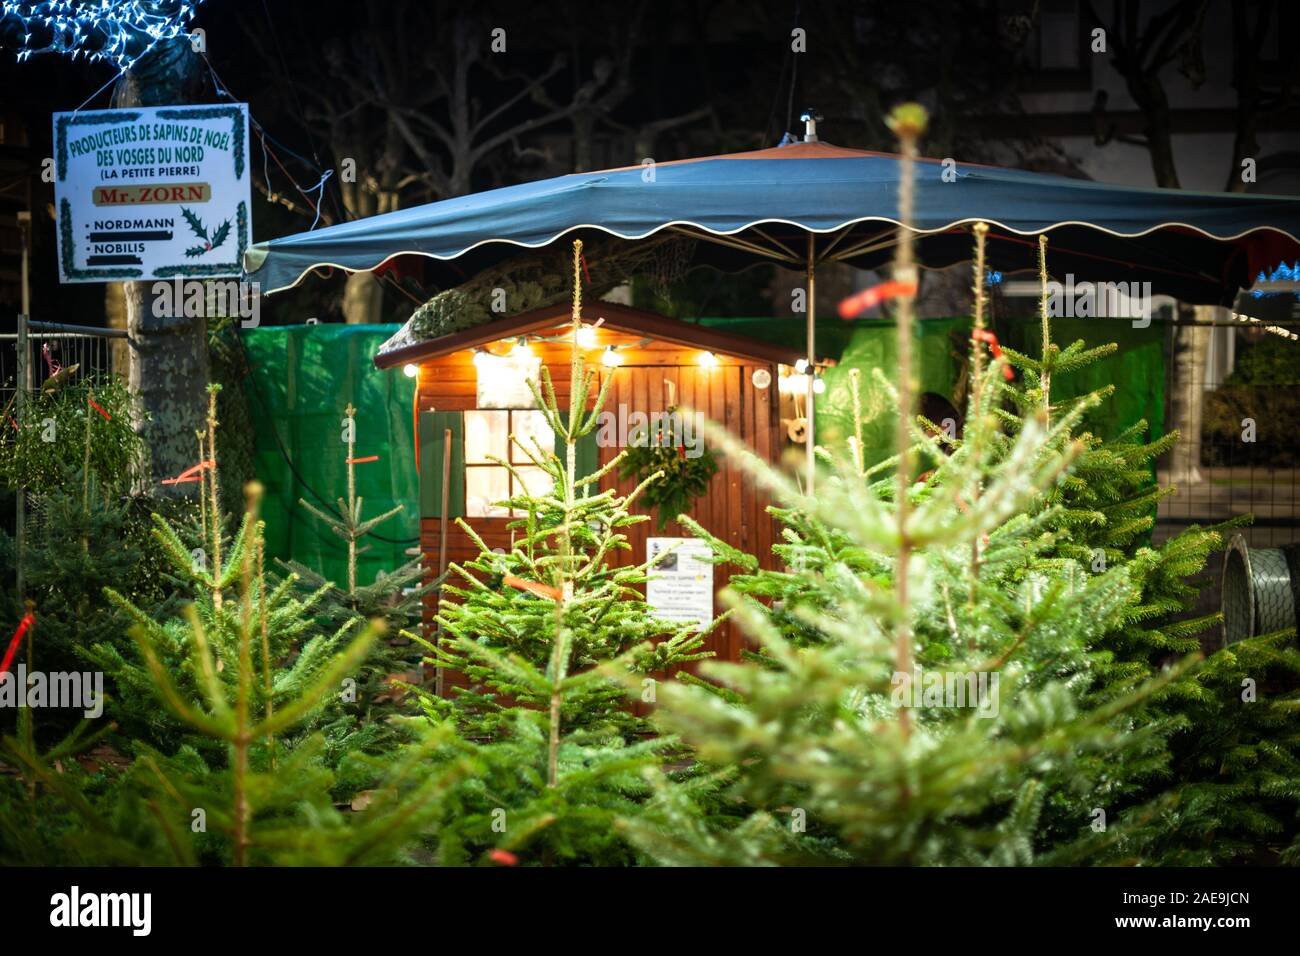 Strasbourg, France - Dec 20, 2016: Christmas market stall selling beautiful alsatian fir trees from Nord Vosges mountains ferme of Mr Zorn Nordman and Nobilis fir trees for sale Stock Photo